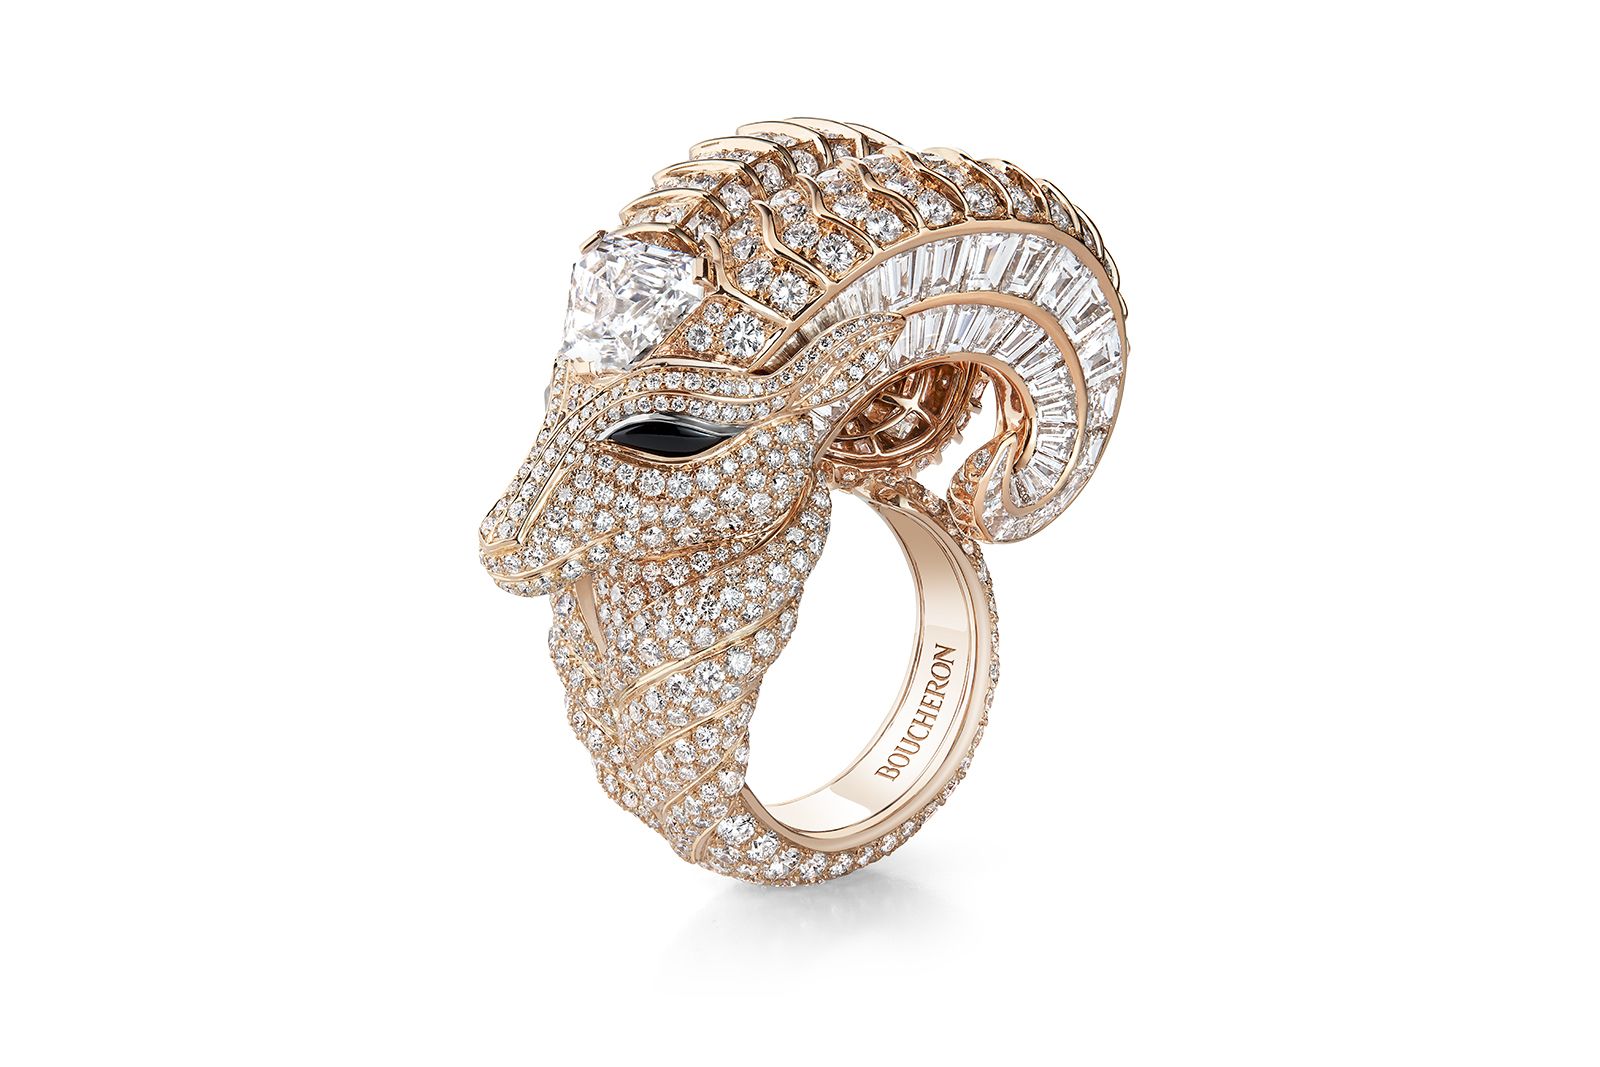 Boucheron diamond, onyx and pink gold Gazelle ring from the Carte Blanche Ailleurs High Jewellery collection